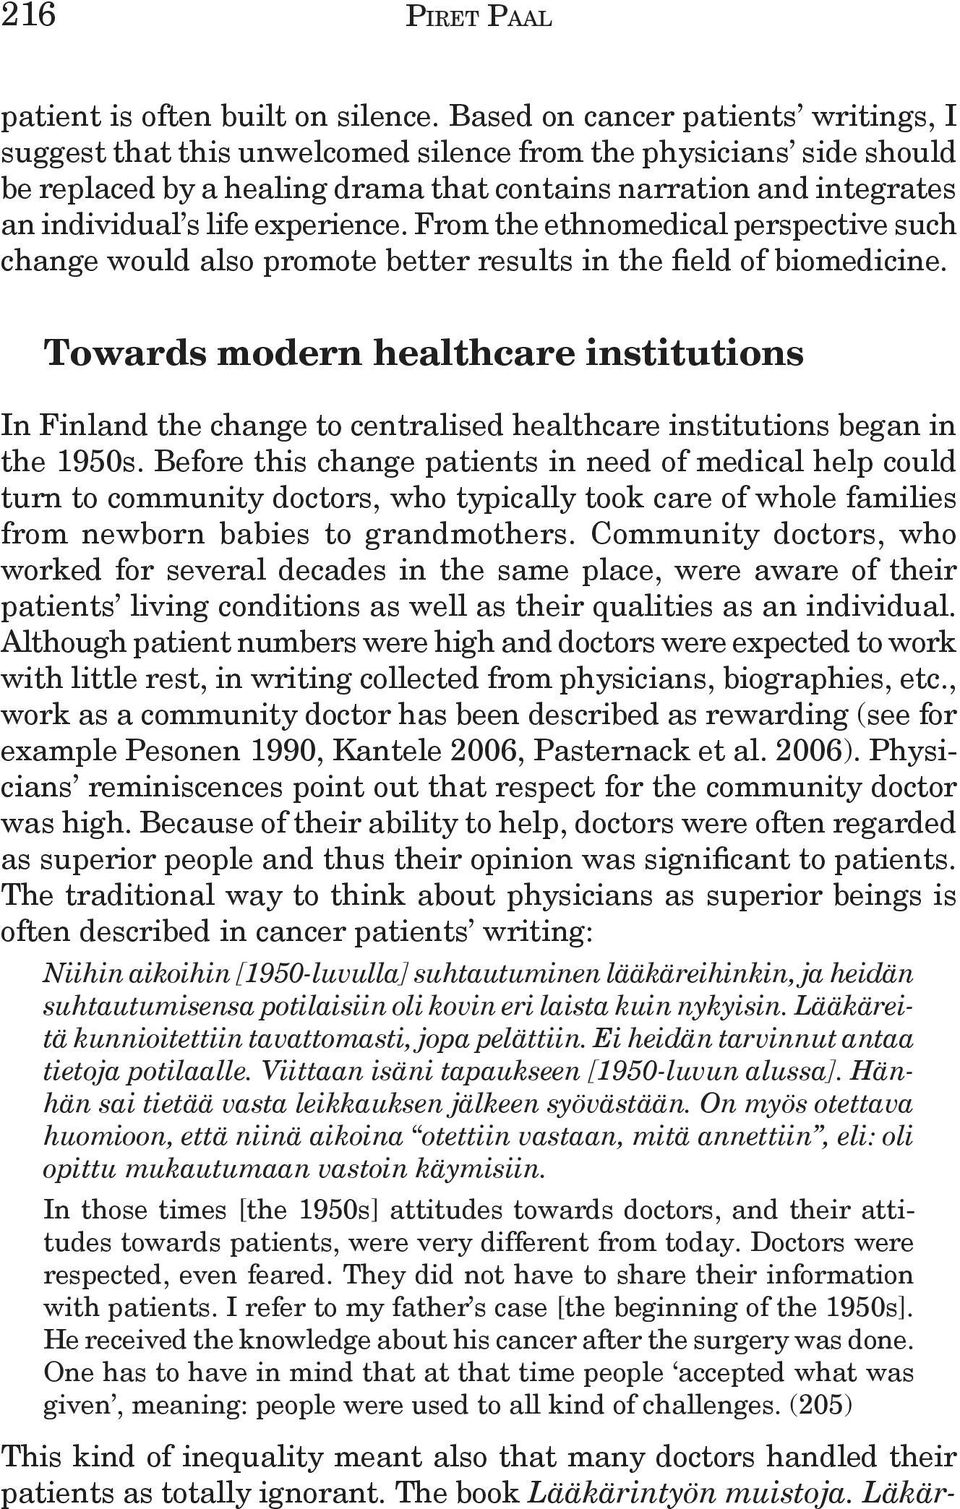 experience. From the ethnomedical perspective such change would also promote better results in the field of biomedicine.